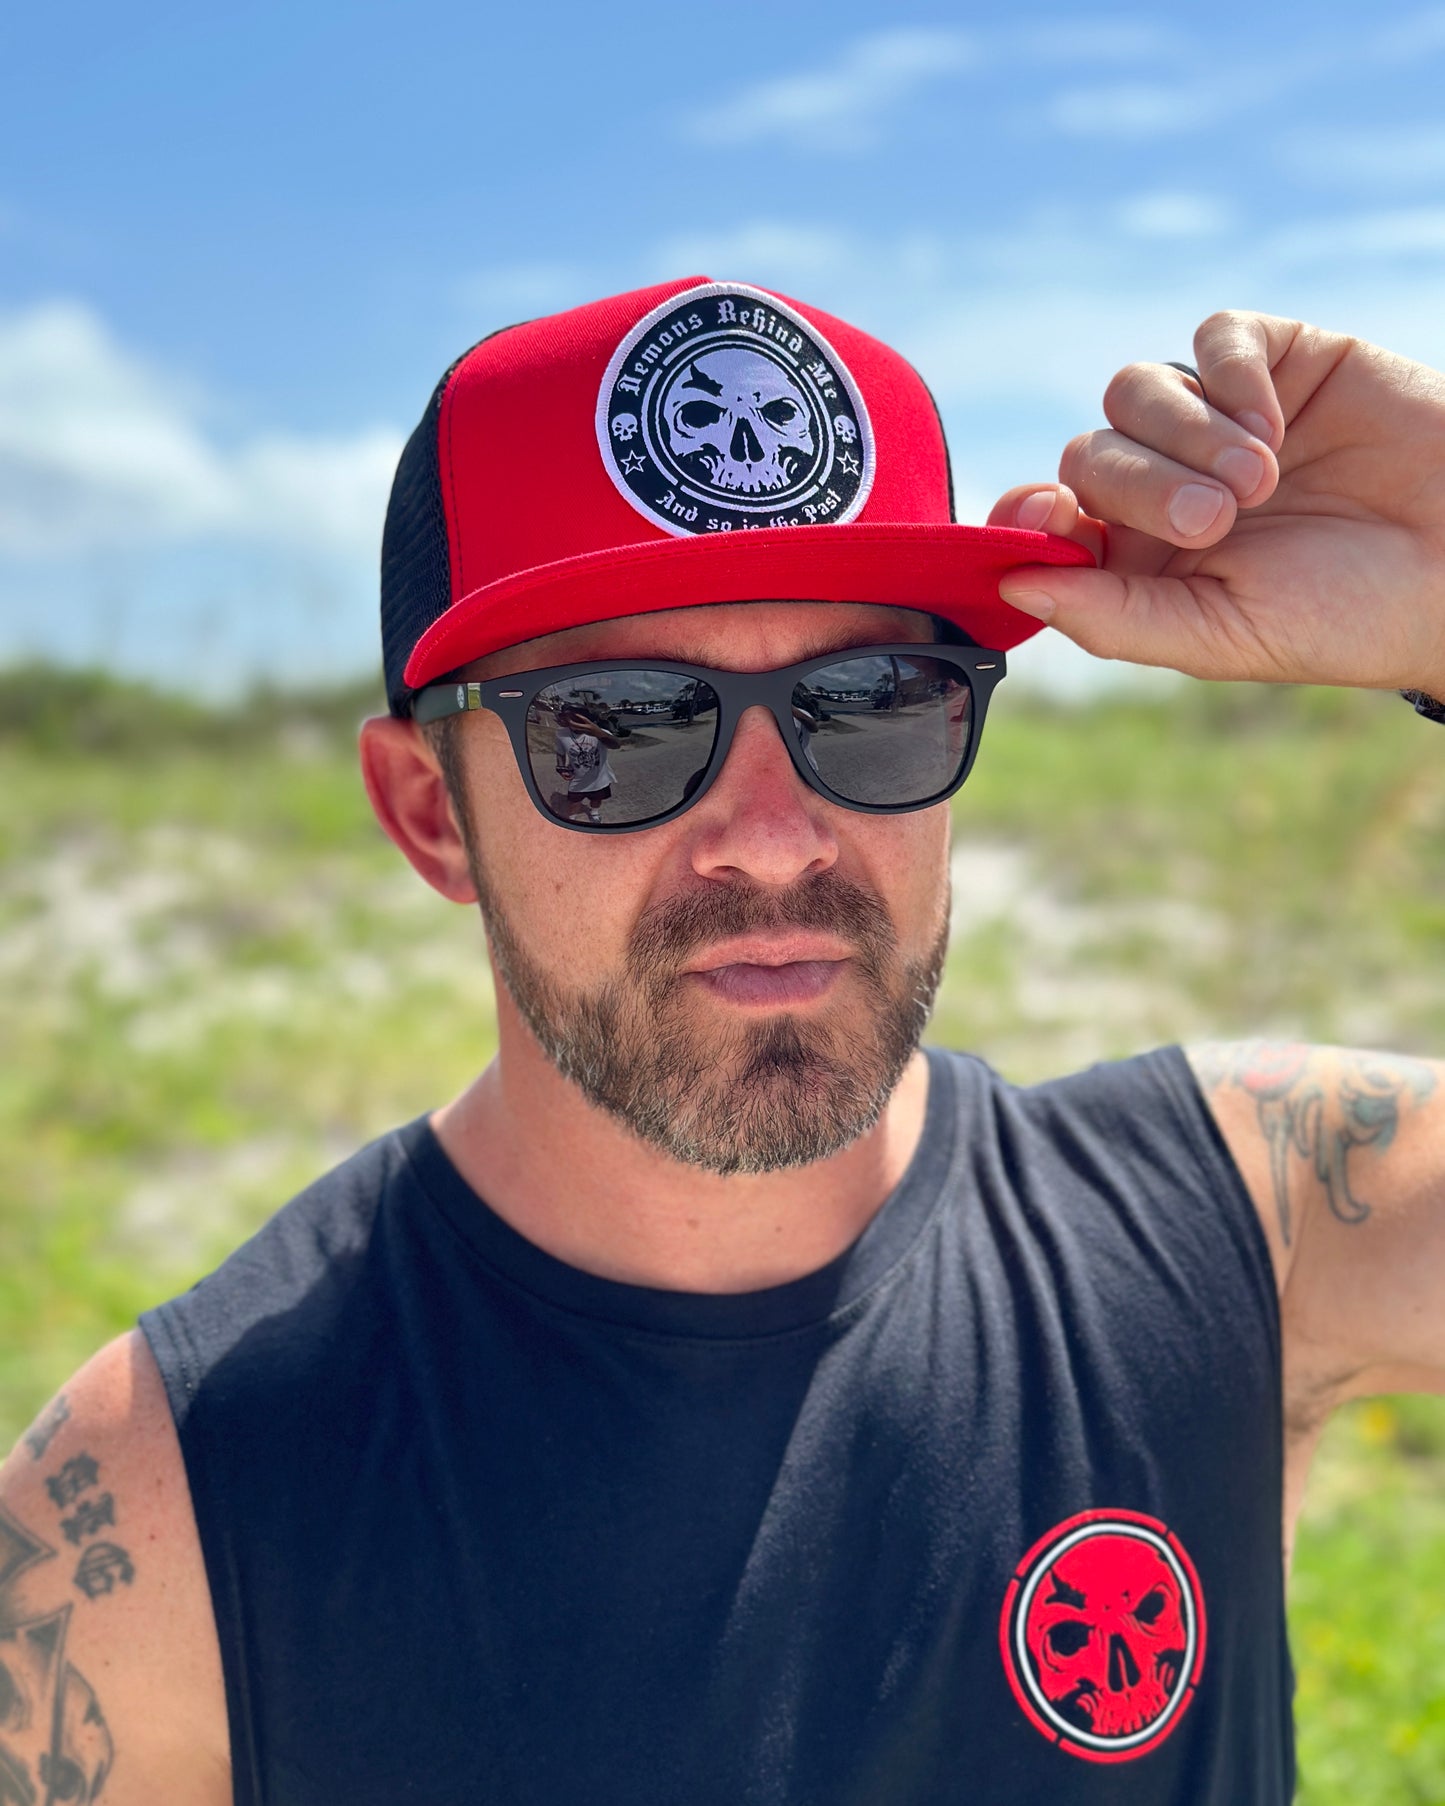 NEW! Red & Black Classic Trucker Circle Skull Patch Hat